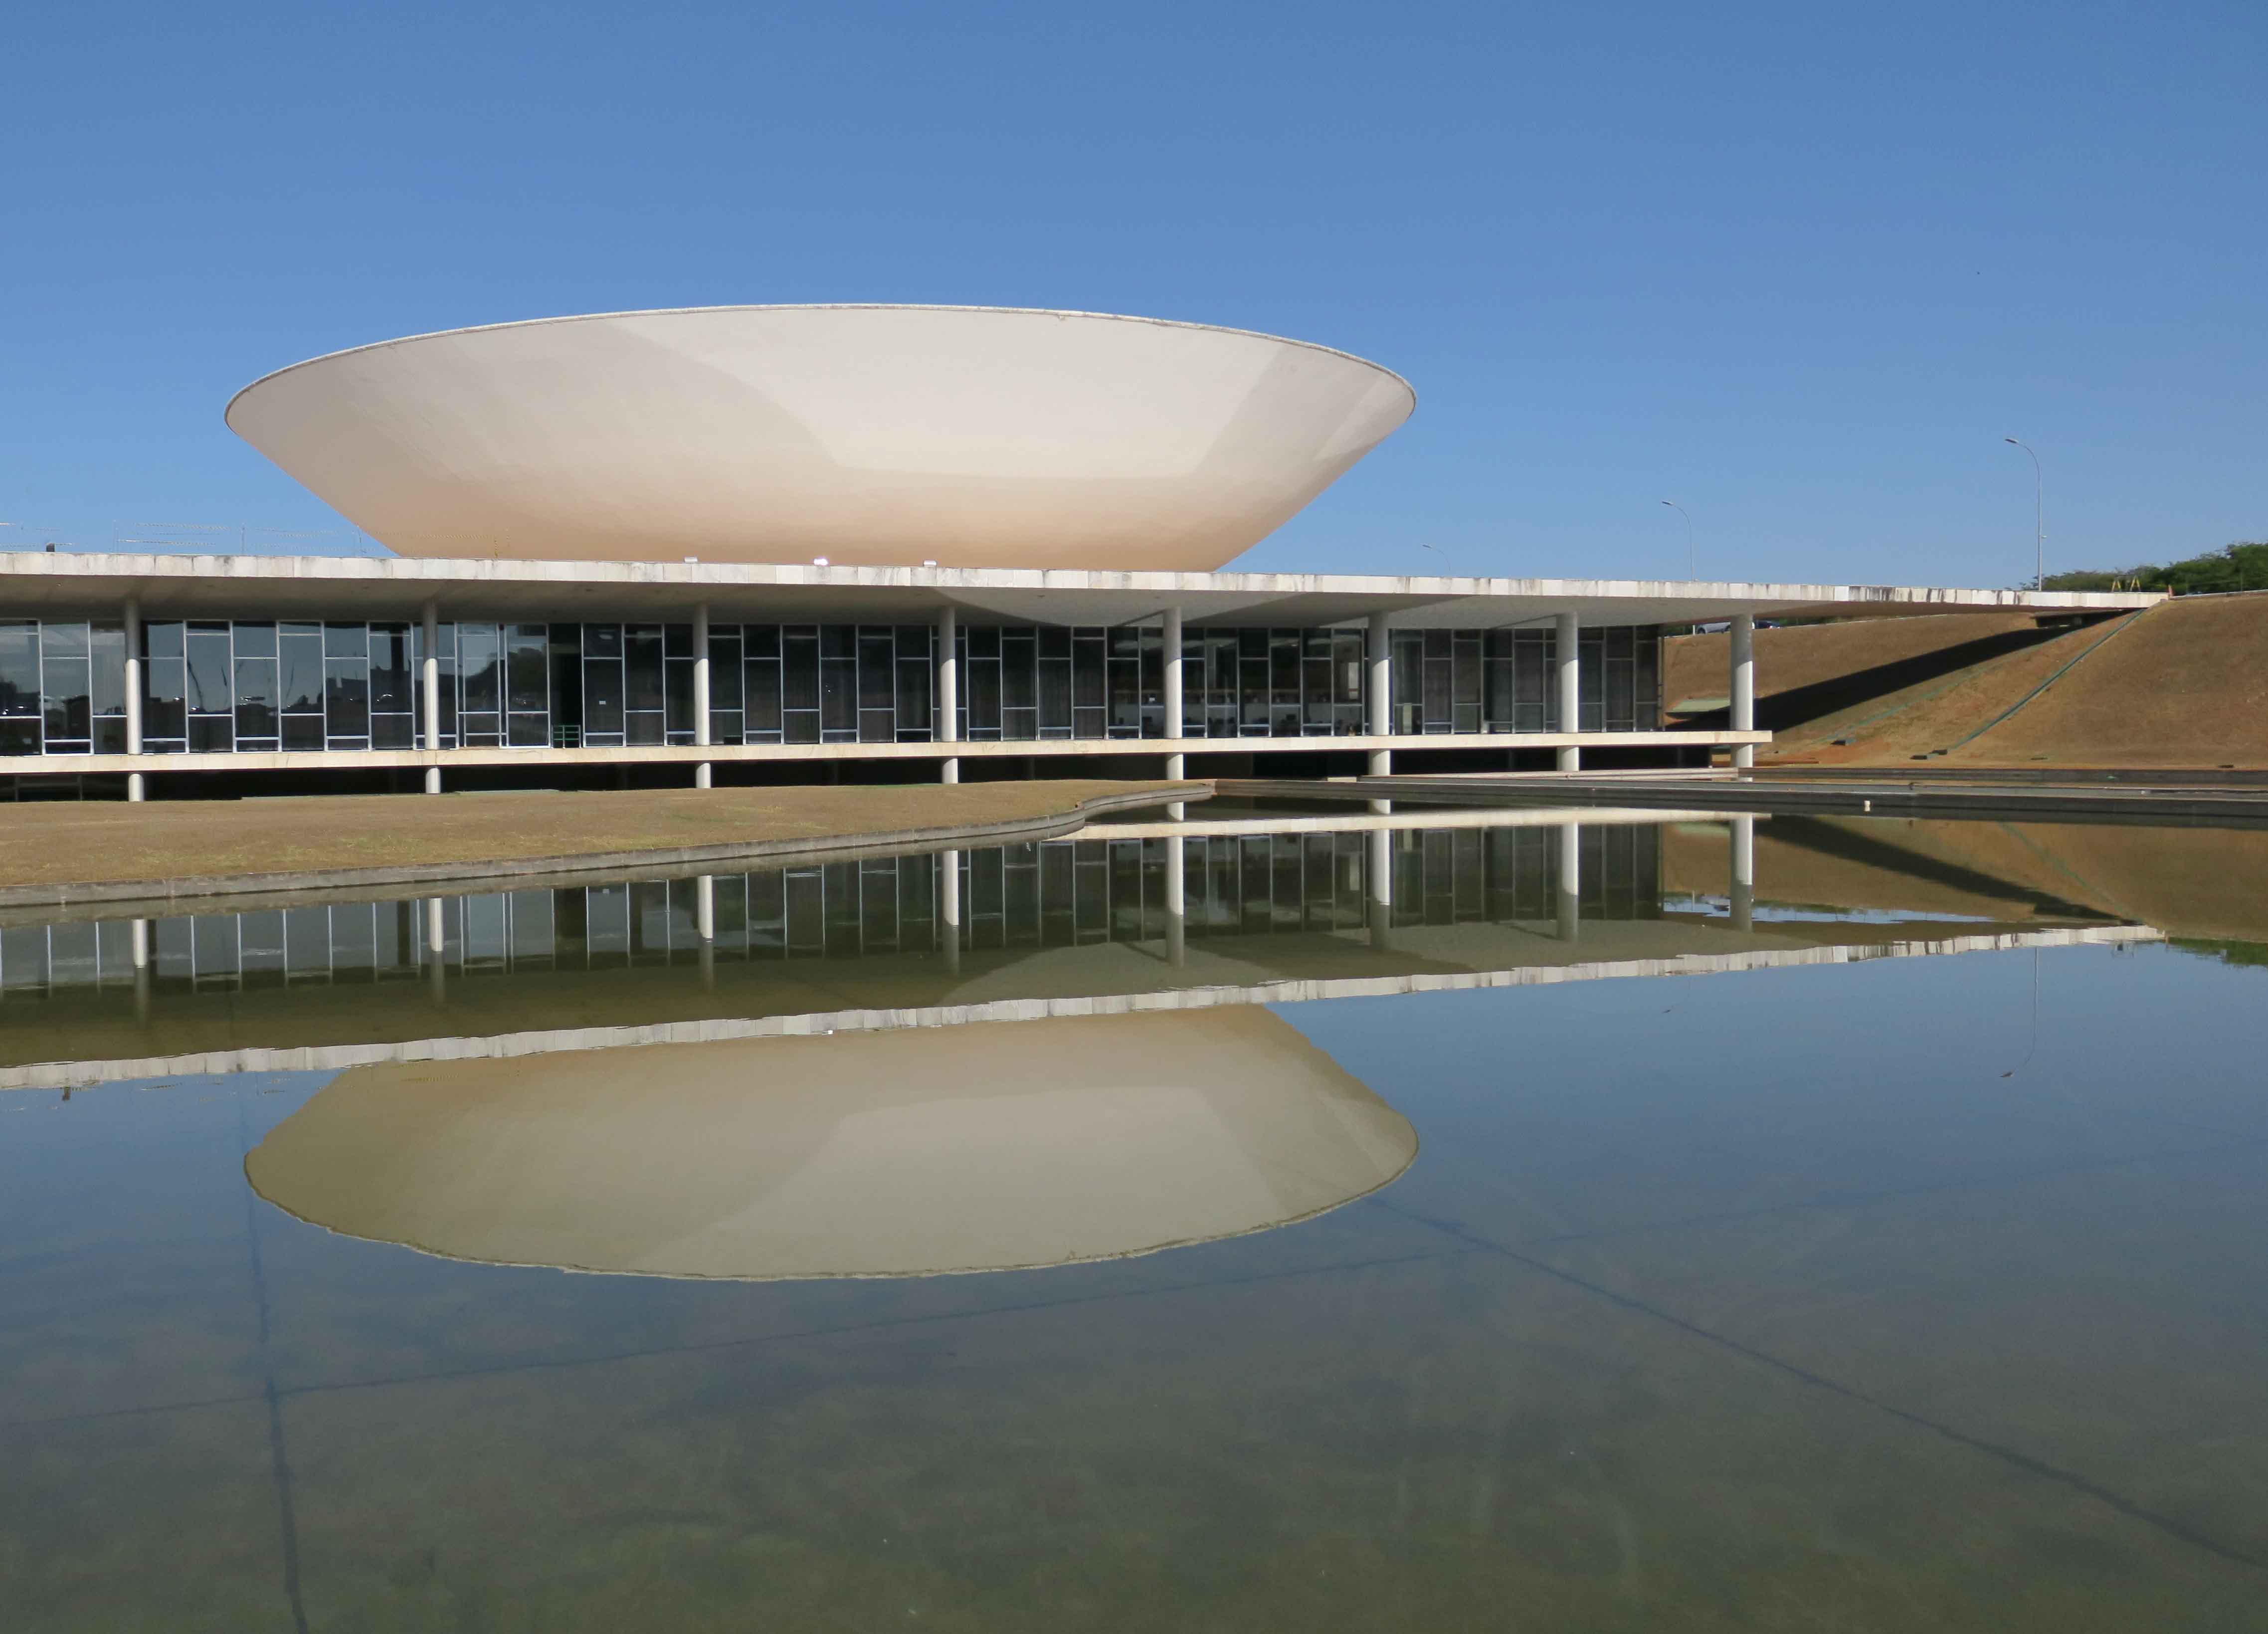 Brasilia: National Congress, House of Representatives Dome; Photo by Paul Clemence